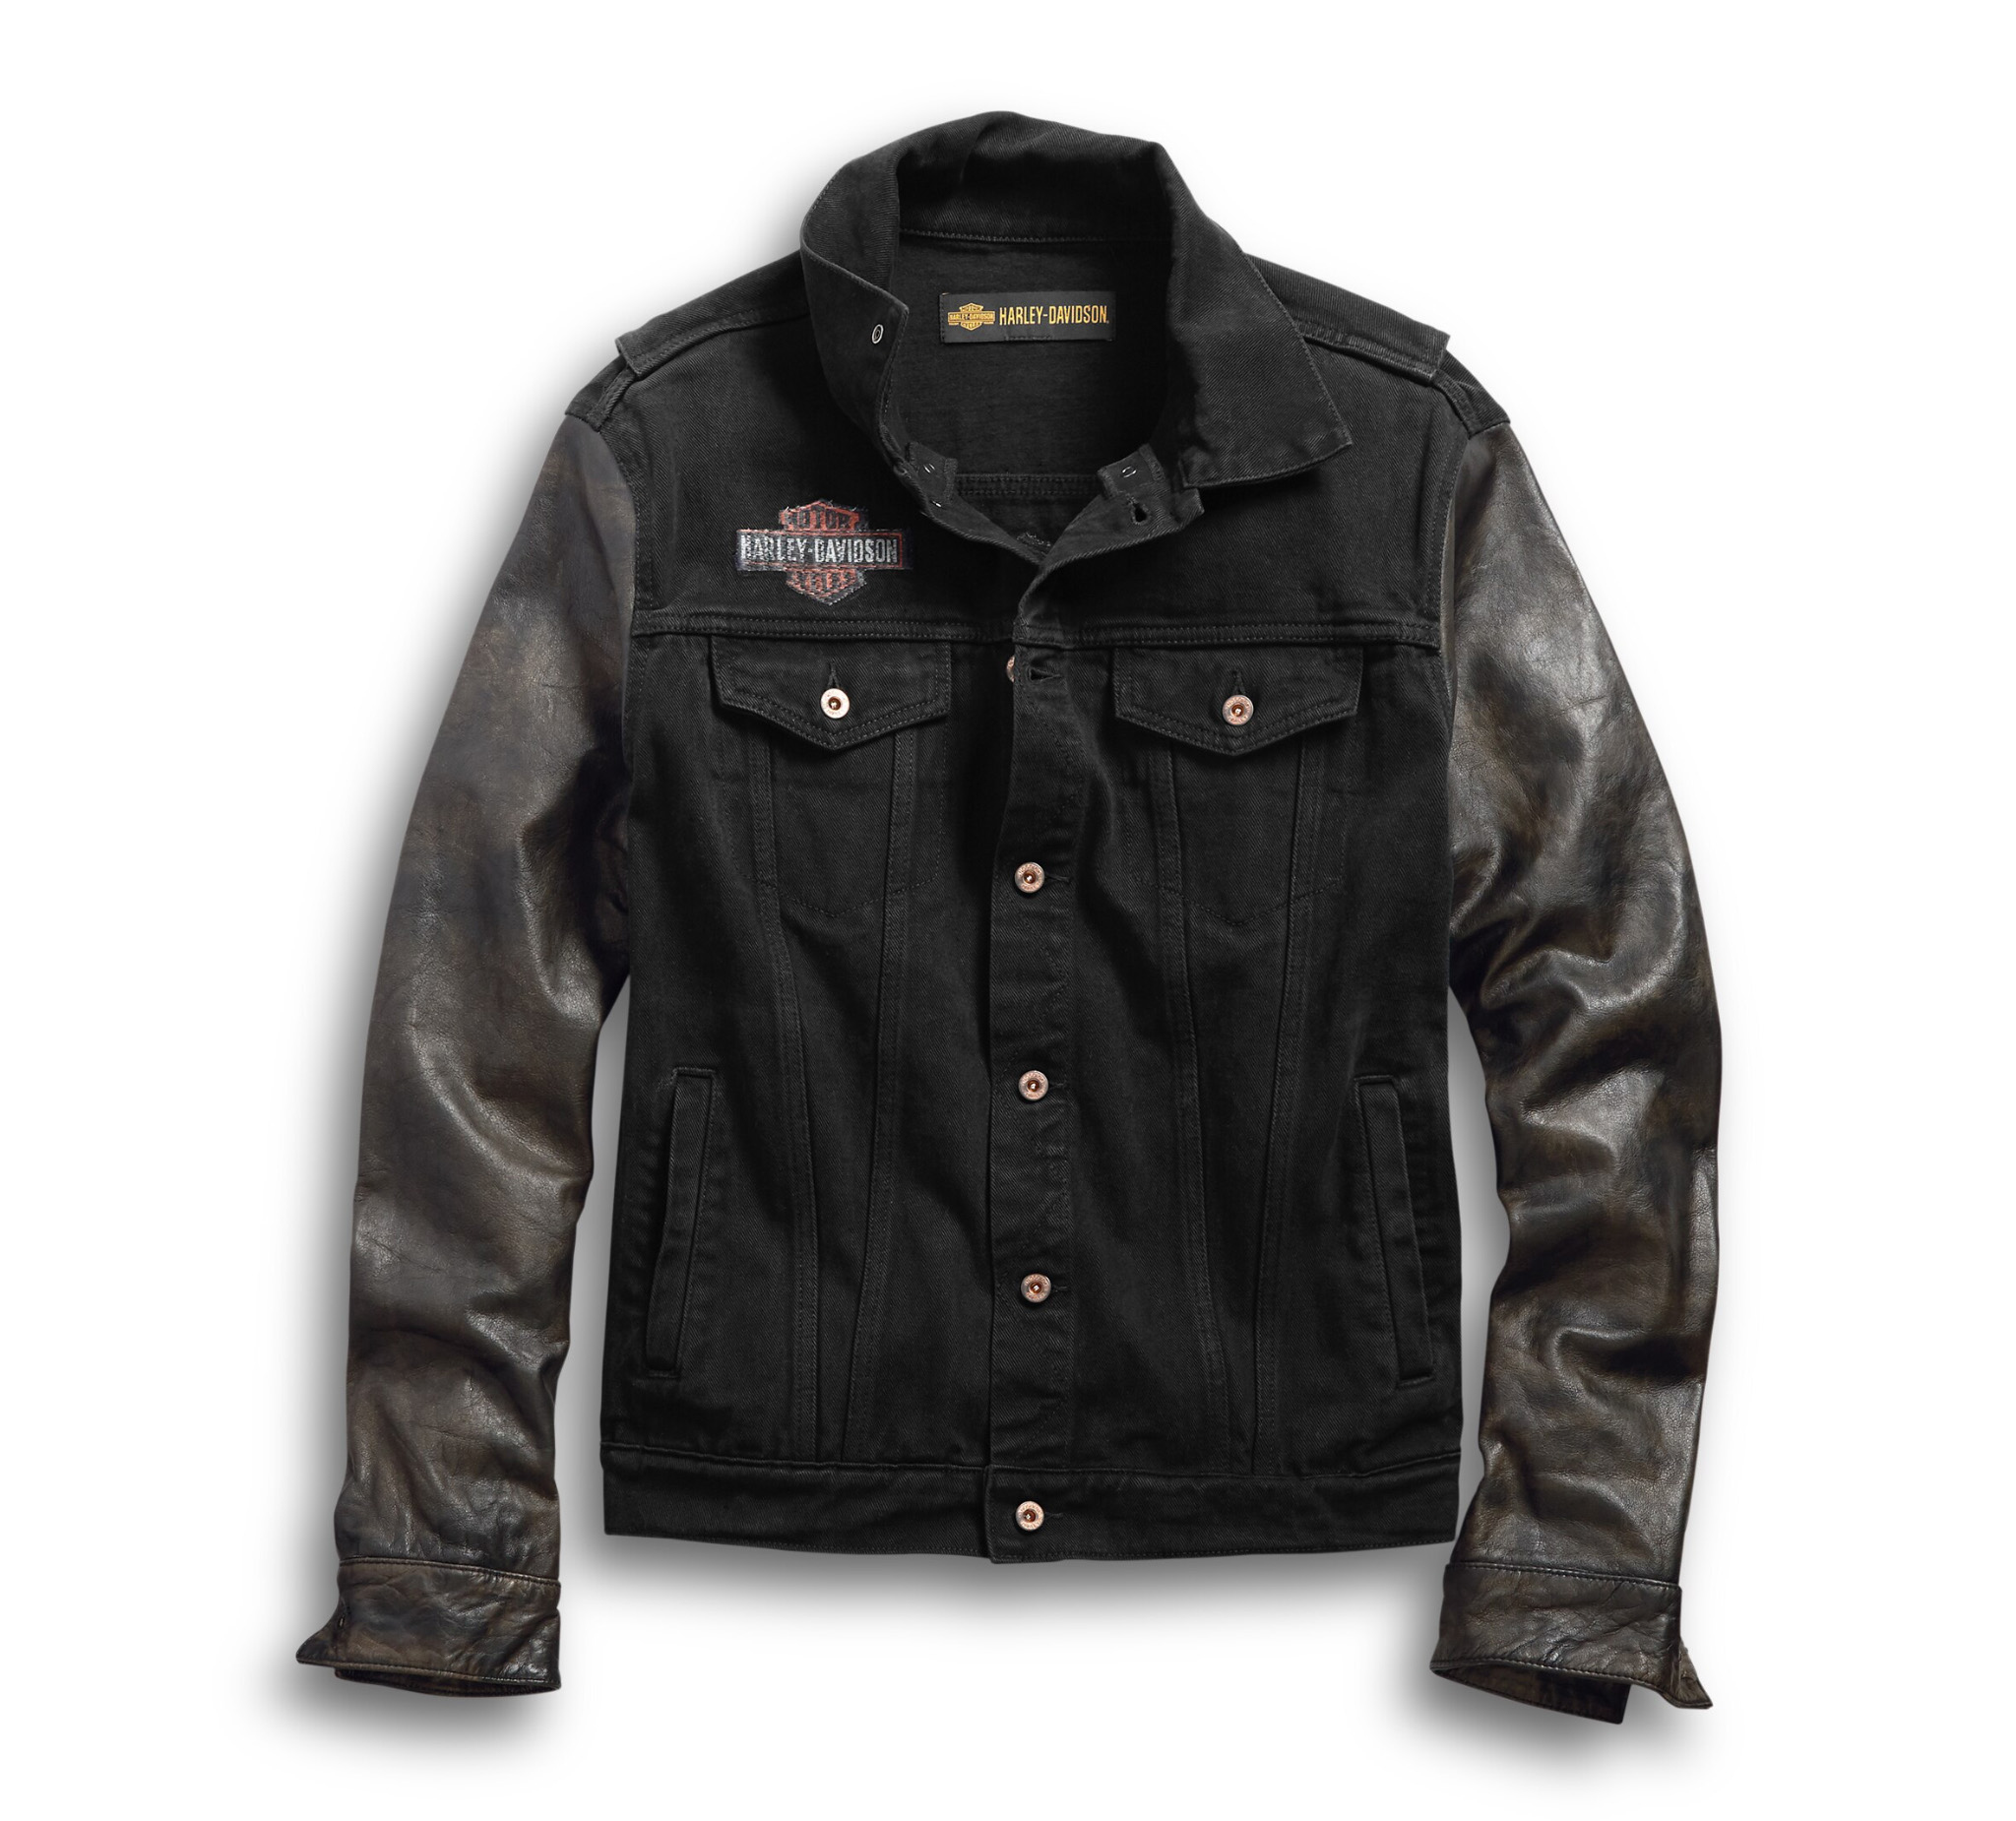 Modern Classics: The Buffalo Jacket - Discover the Essential Spring Blouson  – Oliver Spencer